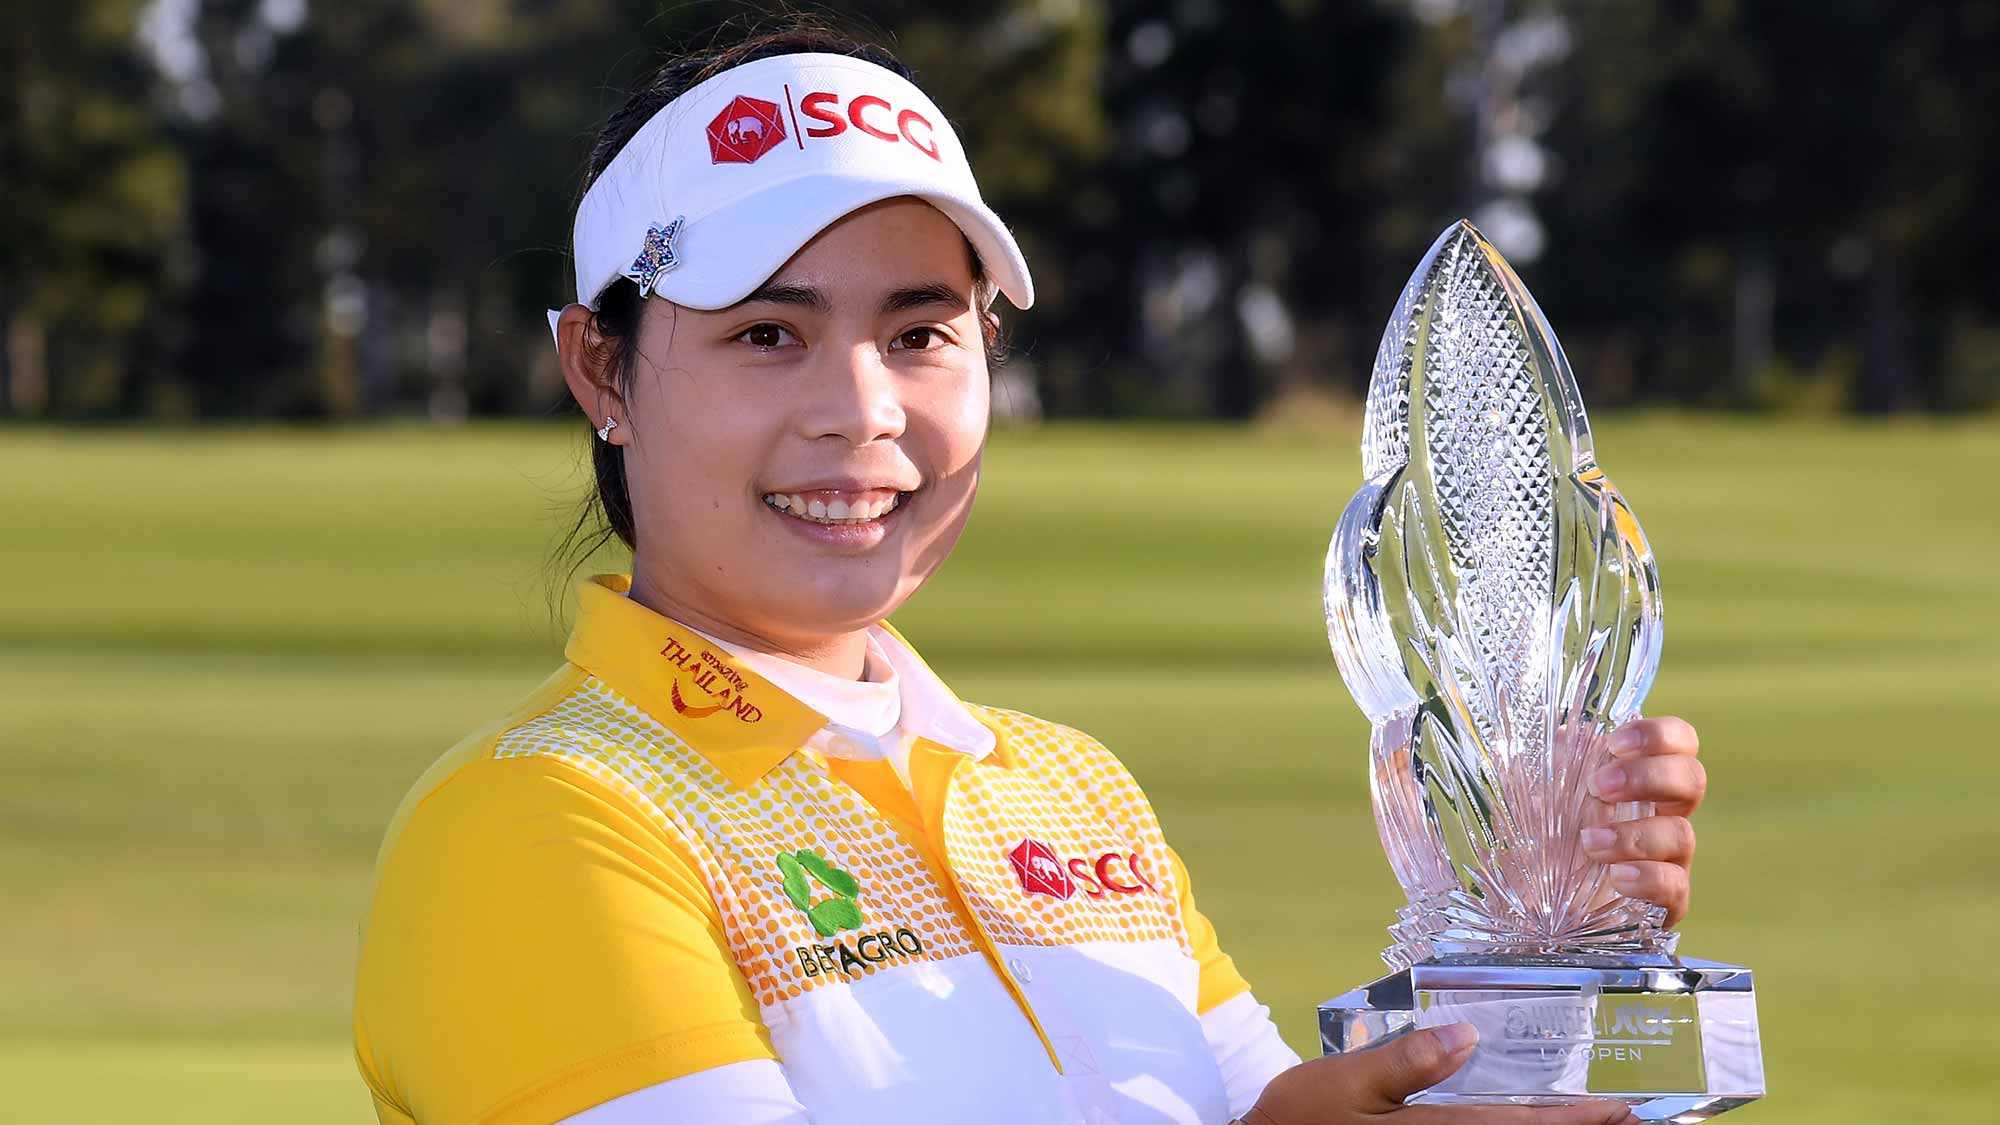 Moriya Jutanugarn of Thailand poses with the trophy after her win during round four of the Hugel-JTBC LA Open at the Wilshire Country Club on April 22, 2018 in Los Angeles, California